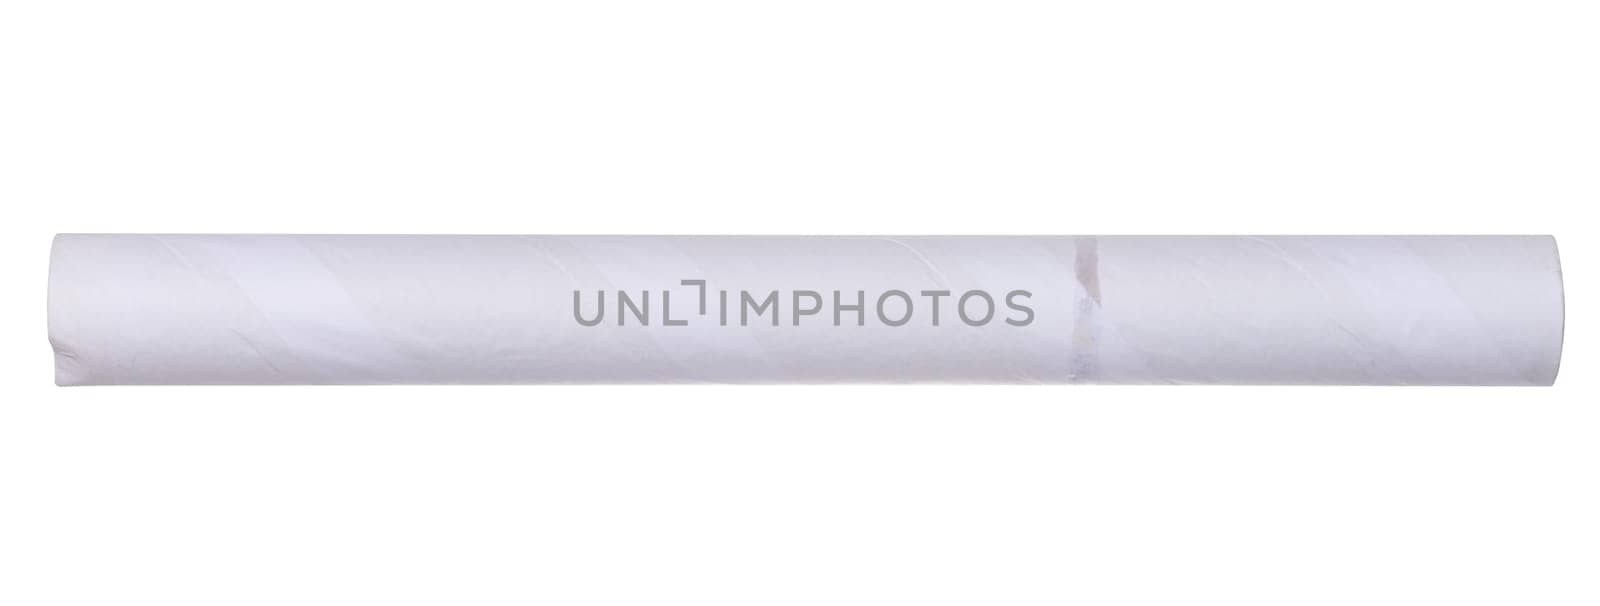 Paper towel tube on white isolated background